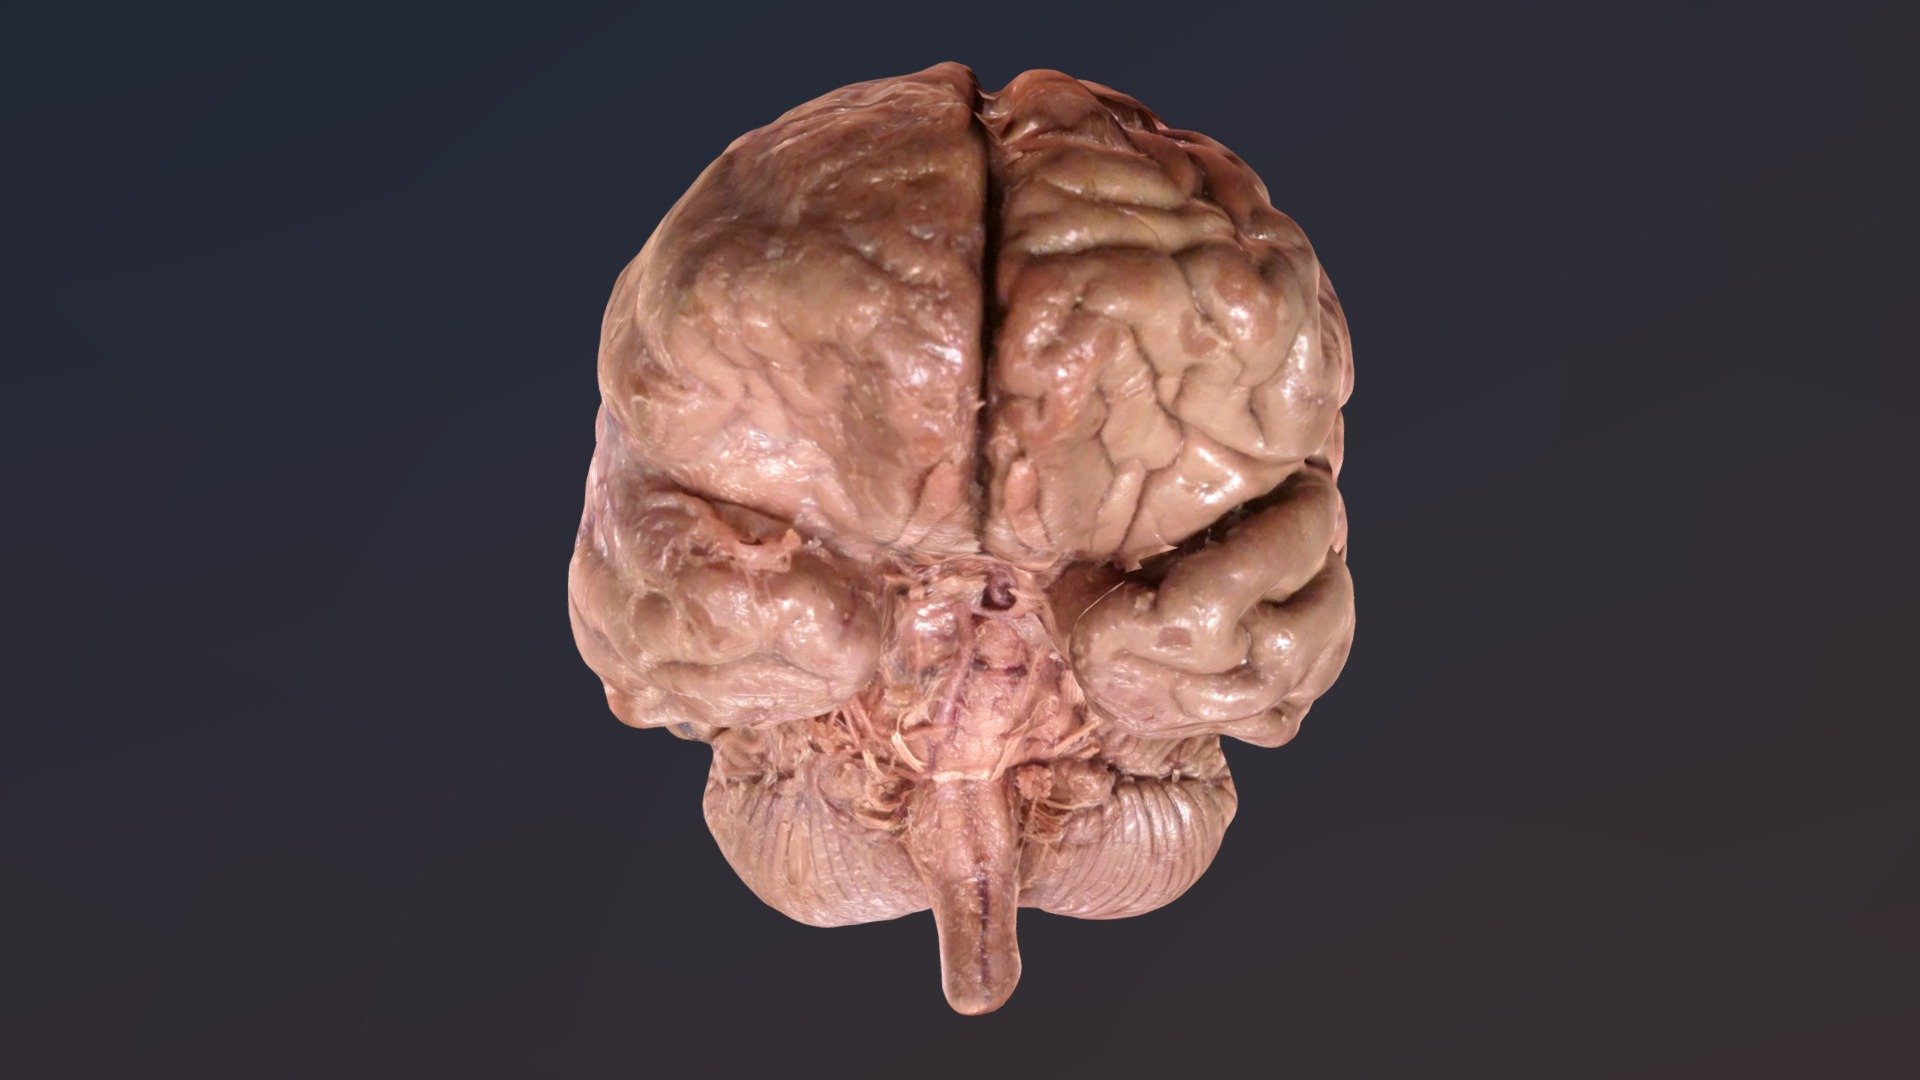 human brain, plastinated, one hlaf covered by arachnoid mater, other half subarachnoidal with cranial nerves visible
authors: A. Brunnmeier, D. Studer, B. Hensen, G. Toubekis, R. Klamma Computer Sciences 5, RWTH Aachen, Germany; S.L. Behrens, Neuroanatomy, UK Aachen, Germany; A. Herrler, Anatomy &amp; Embryology, FHML, Maastricht University, The Netherlands 
Creative Commons Attritbution – Non Commercial – Share Alike - Brain - 3D model by aherrler 3d model